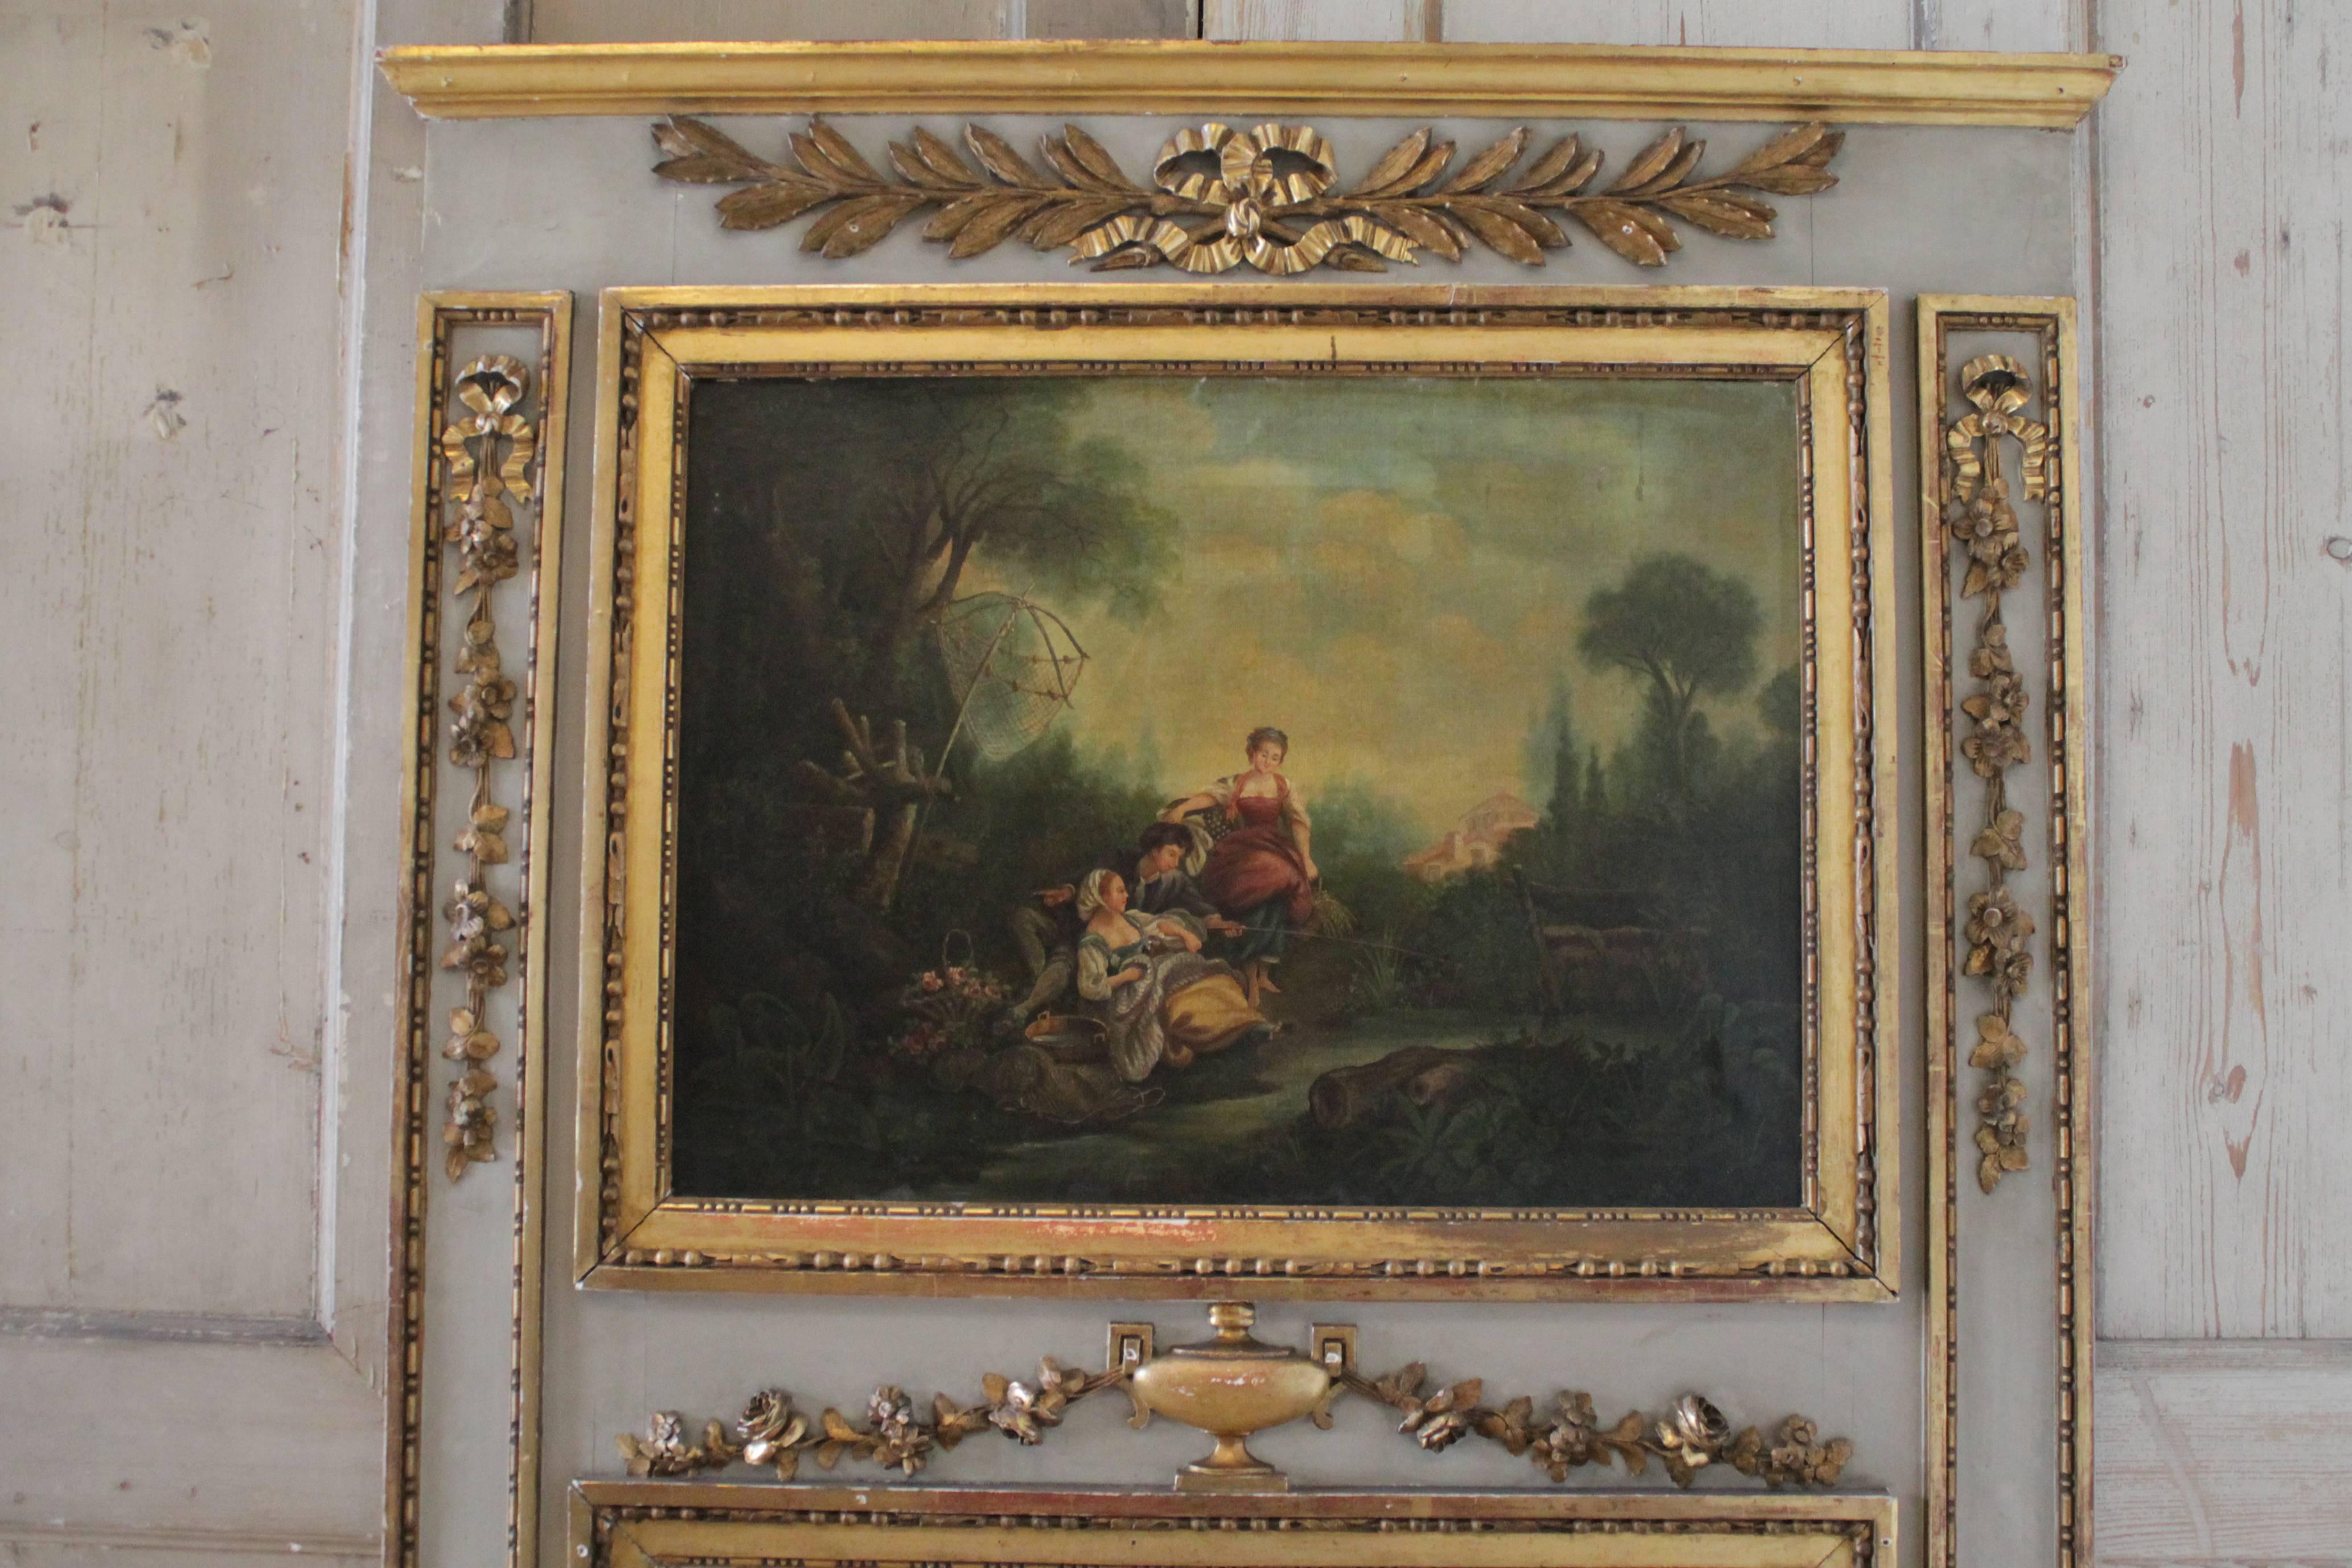 Marvelous 19th century French painted and parcel-gilt trumeau. Having a lovely carved urn, swag and ribbon details. Featuring oil on canvas of landscape with figures and an excellent aged patina.
Color of the frame is a muted grey with